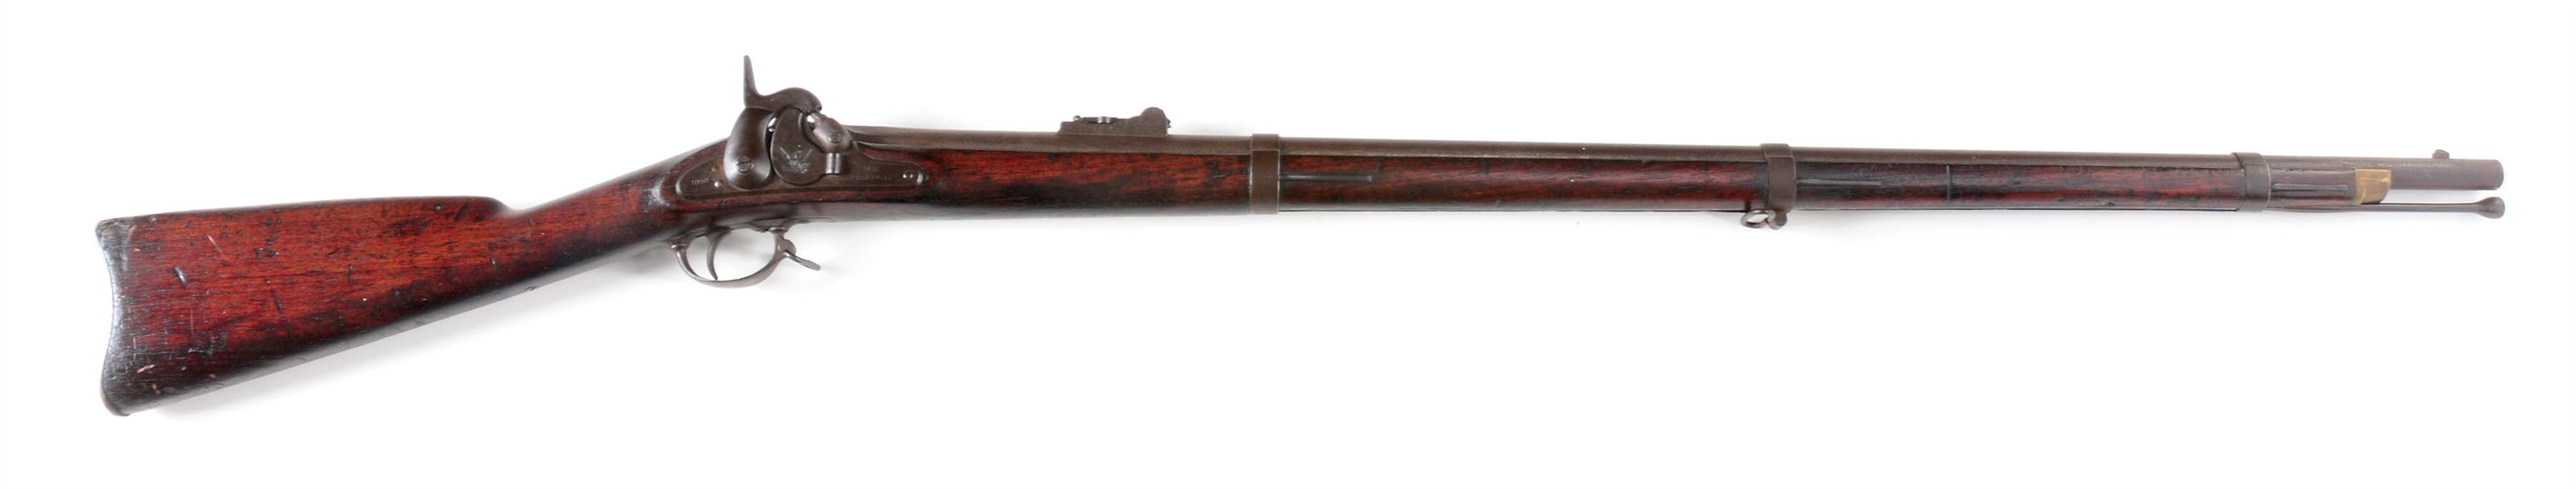 (A) SPRINGFIELD MODEL 1855 RIFLED MUSKET, DATED 1858.